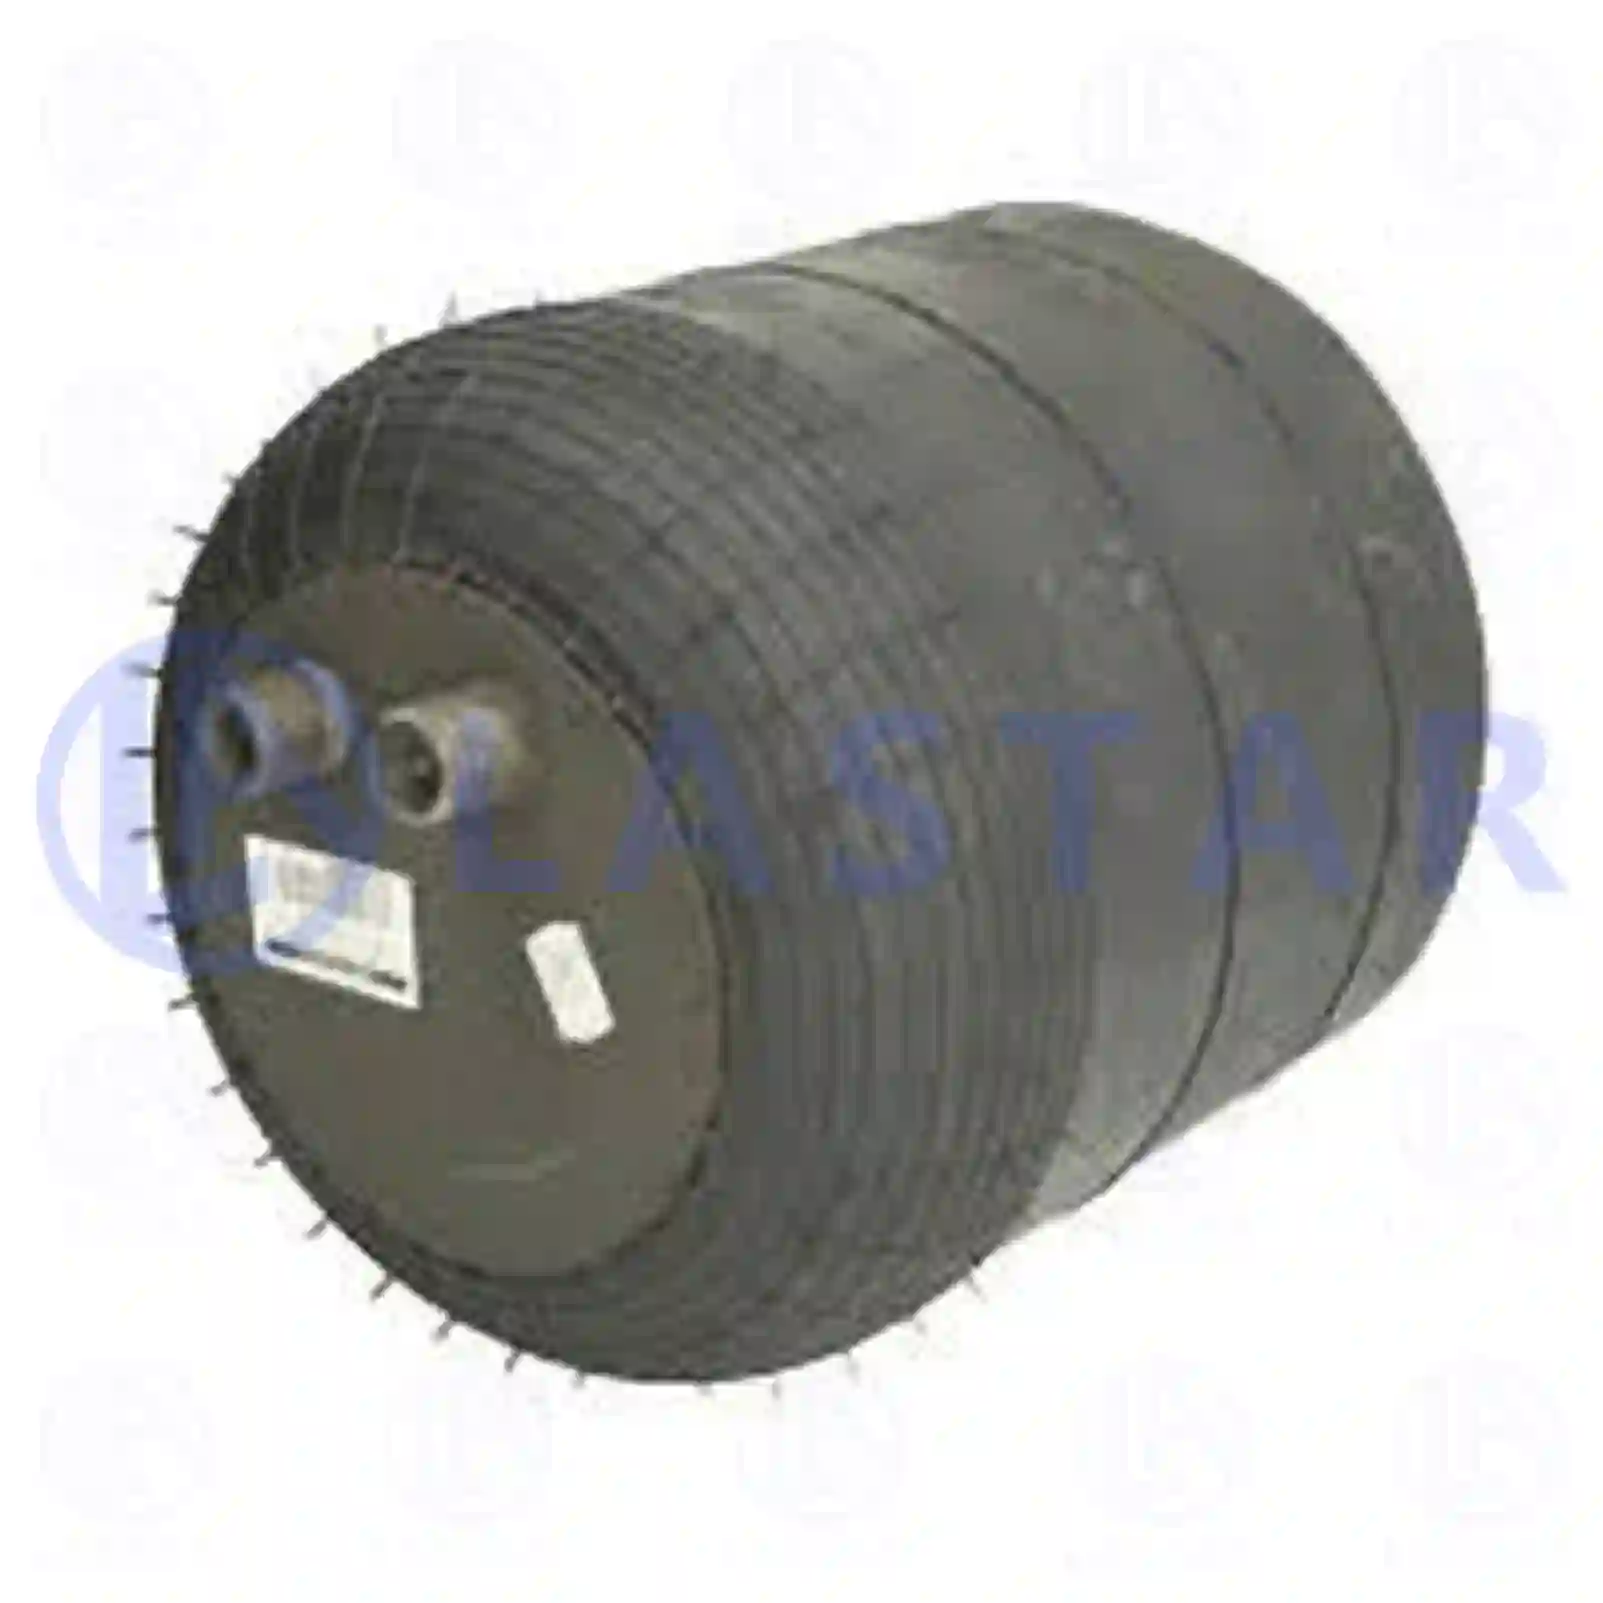 Air spring, with steel piston, 77728165, 9423200221, 9423202021, 9423202121, 9423202921, 9423205021, 942320502110, MLF7108, MLF7109, ZG40771-0008 ||  77728165 Lastar Spare Part | Truck Spare Parts, Auotomotive Spare Parts Air spring, with steel piston, 77728165, 9423200221, 9423202021, 9423202121, 9423202921, 9423205021, 942320502110, MLF7108, MLF7109, ZG40771-0008 ||  77728165 Lastar Spare Part | Truck Spare Parts, Auotomotive Spare Parts